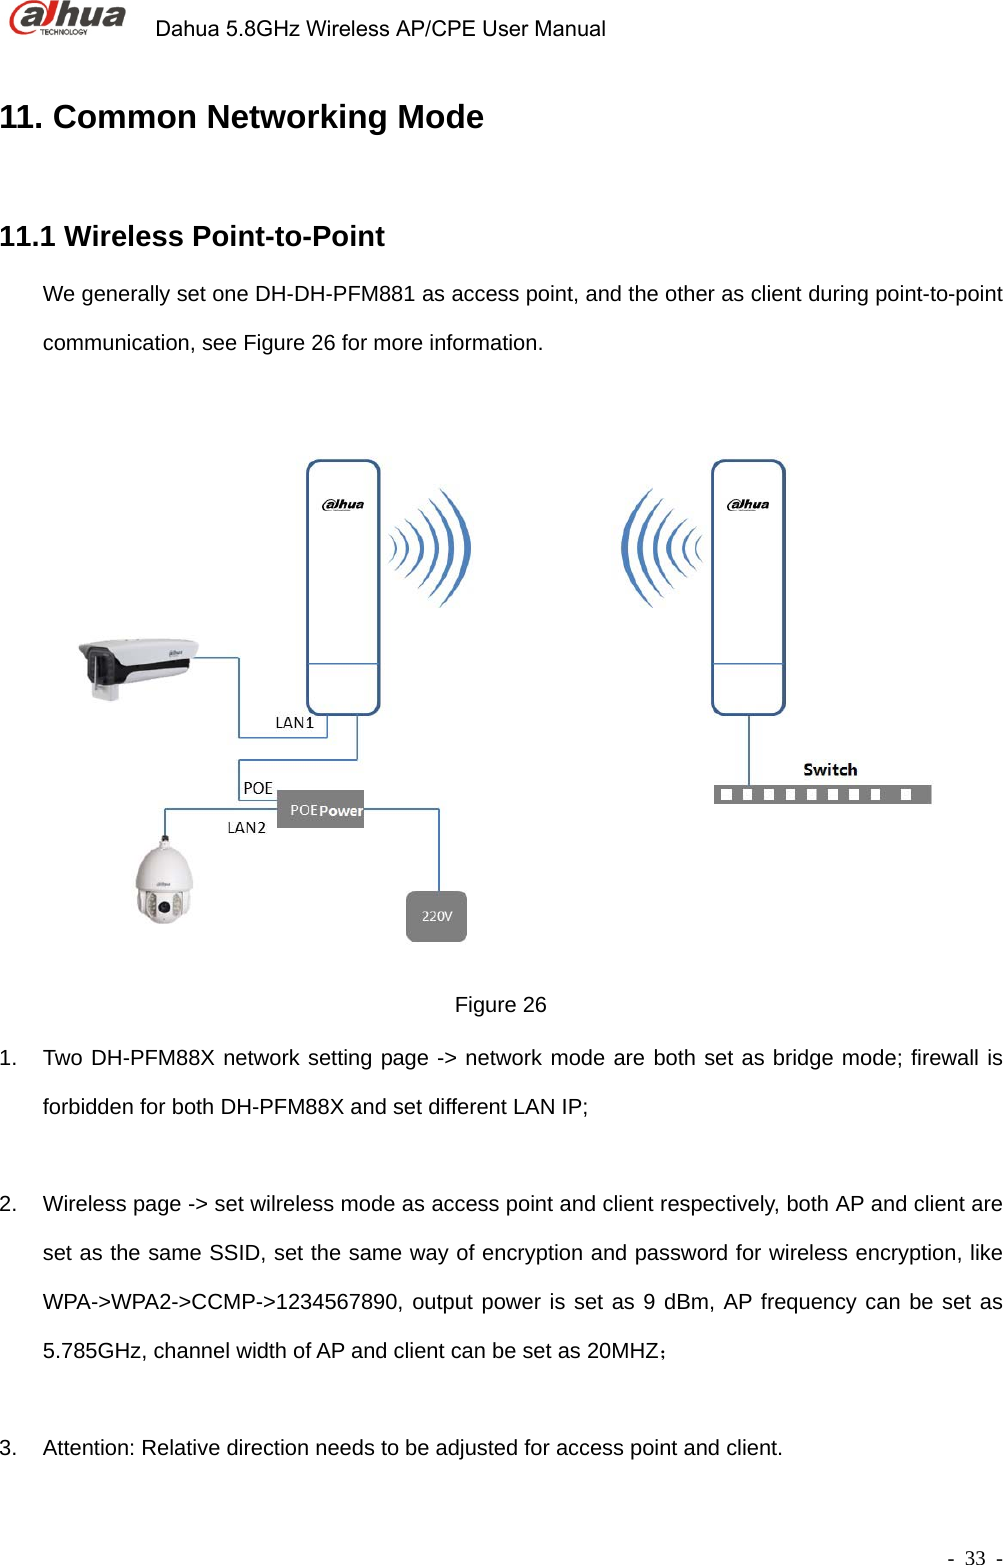             Dahua 5.8GHz Wireless AP/CPE User Manual        - 33 - 11. Common Networking Mode   11.1 Wireless Point-to-Point We generally set one DH-DH-PFM881 as access point, and the other as client during point-to-point communication, see Figure 26 for more information.  Figure 26 1.  Two DH-PFM88X network setting page -&gt; network mode are both set as bridge mode; firewall is forbidden for both DH-PFM88X and set different LAN IP;  2.  Wireless page -&gt; set wilreless mode as access point and client respectively, both AP and client are set as the same SSID, set the same way of encryption and password for wireless encryption, like WPA-&gt;WPA2-&gt;CCMP-&gt;1234567890, output power is set as 9 dBm, AP frequency can be set as 5.785GHz, channel width of AP and client can be set as 20MHZ；    3.  Attention: Relative direction needs to be adjusted for access point and client. 